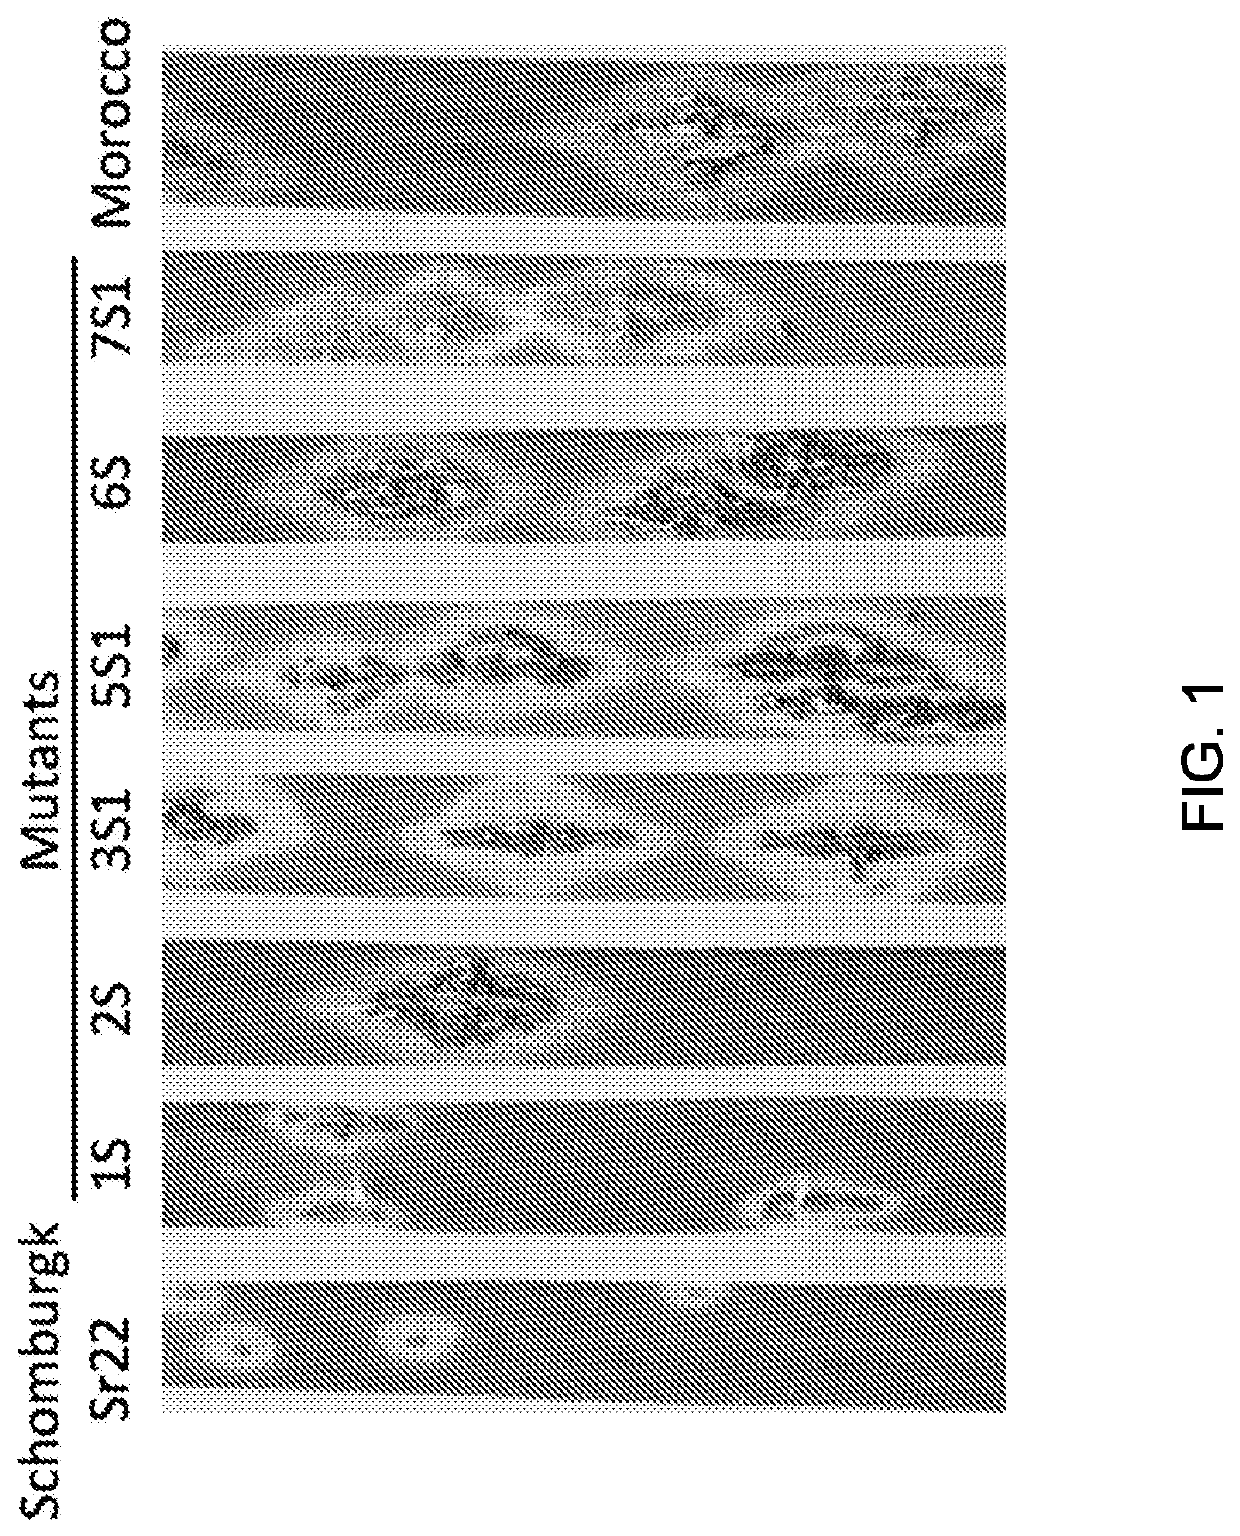 Wheat stem rust resistance genes and methods of use